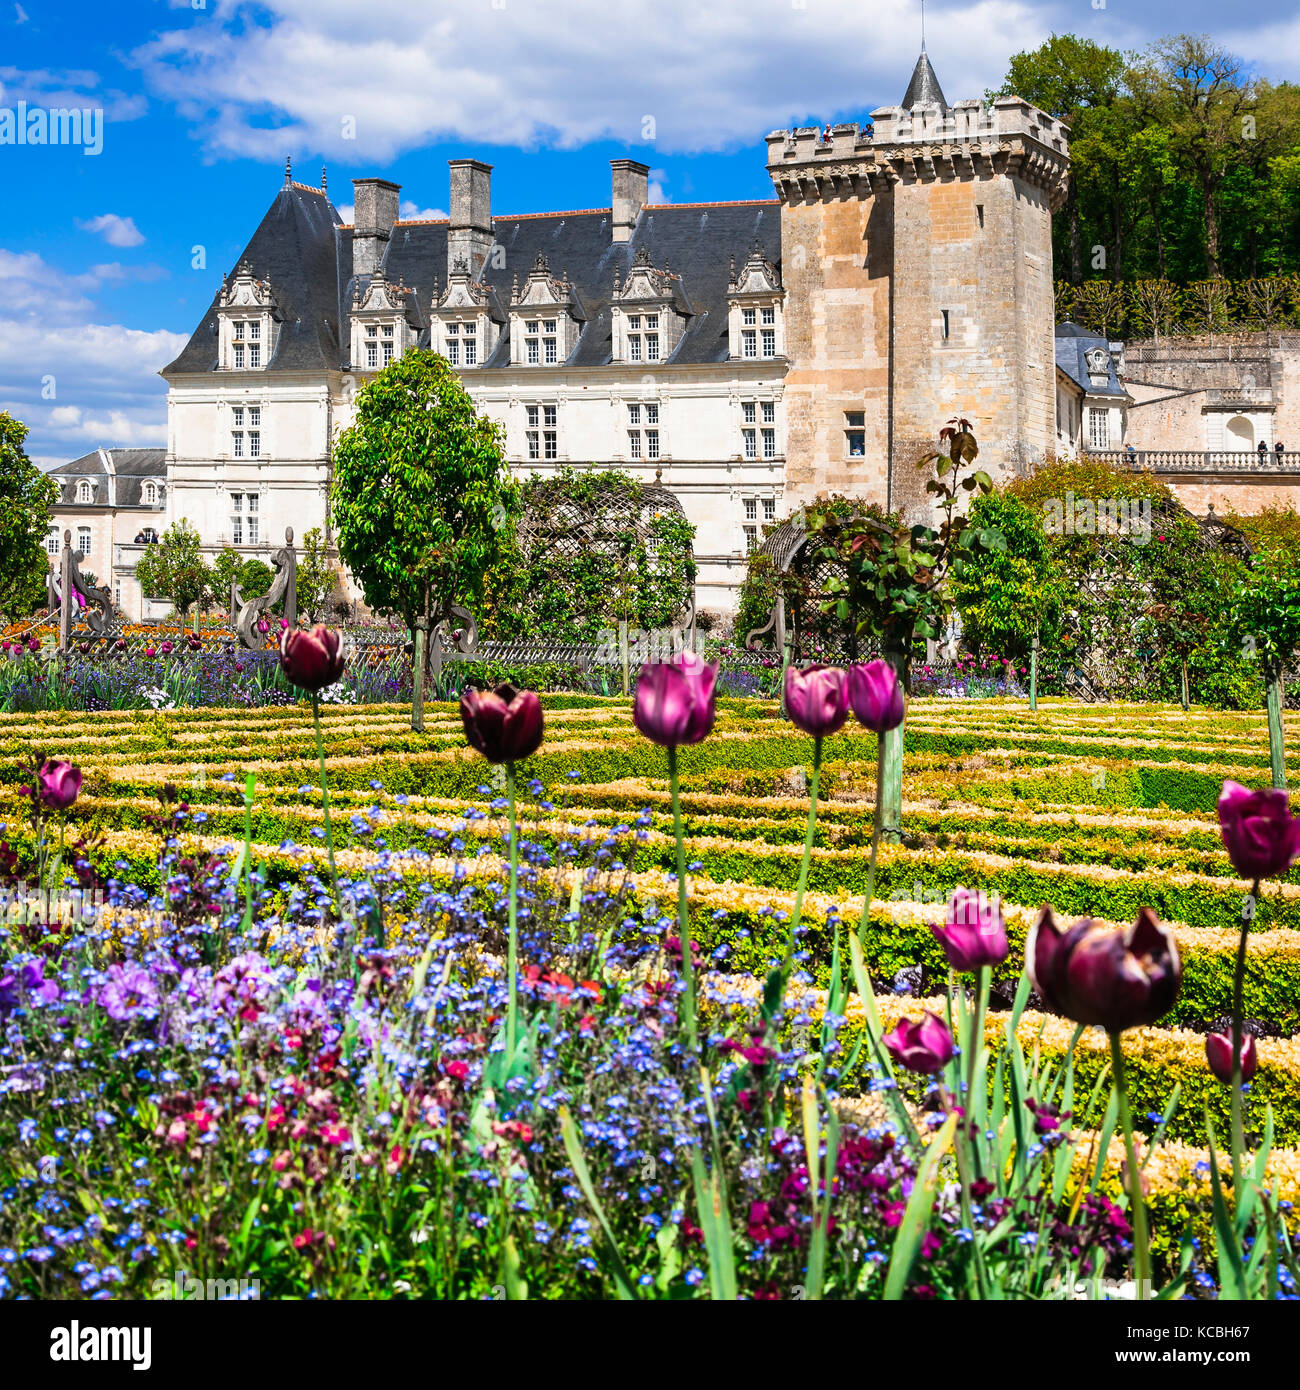 Beautiful Villandry castle,Loire valley,view with gardens,France. Stock Photo